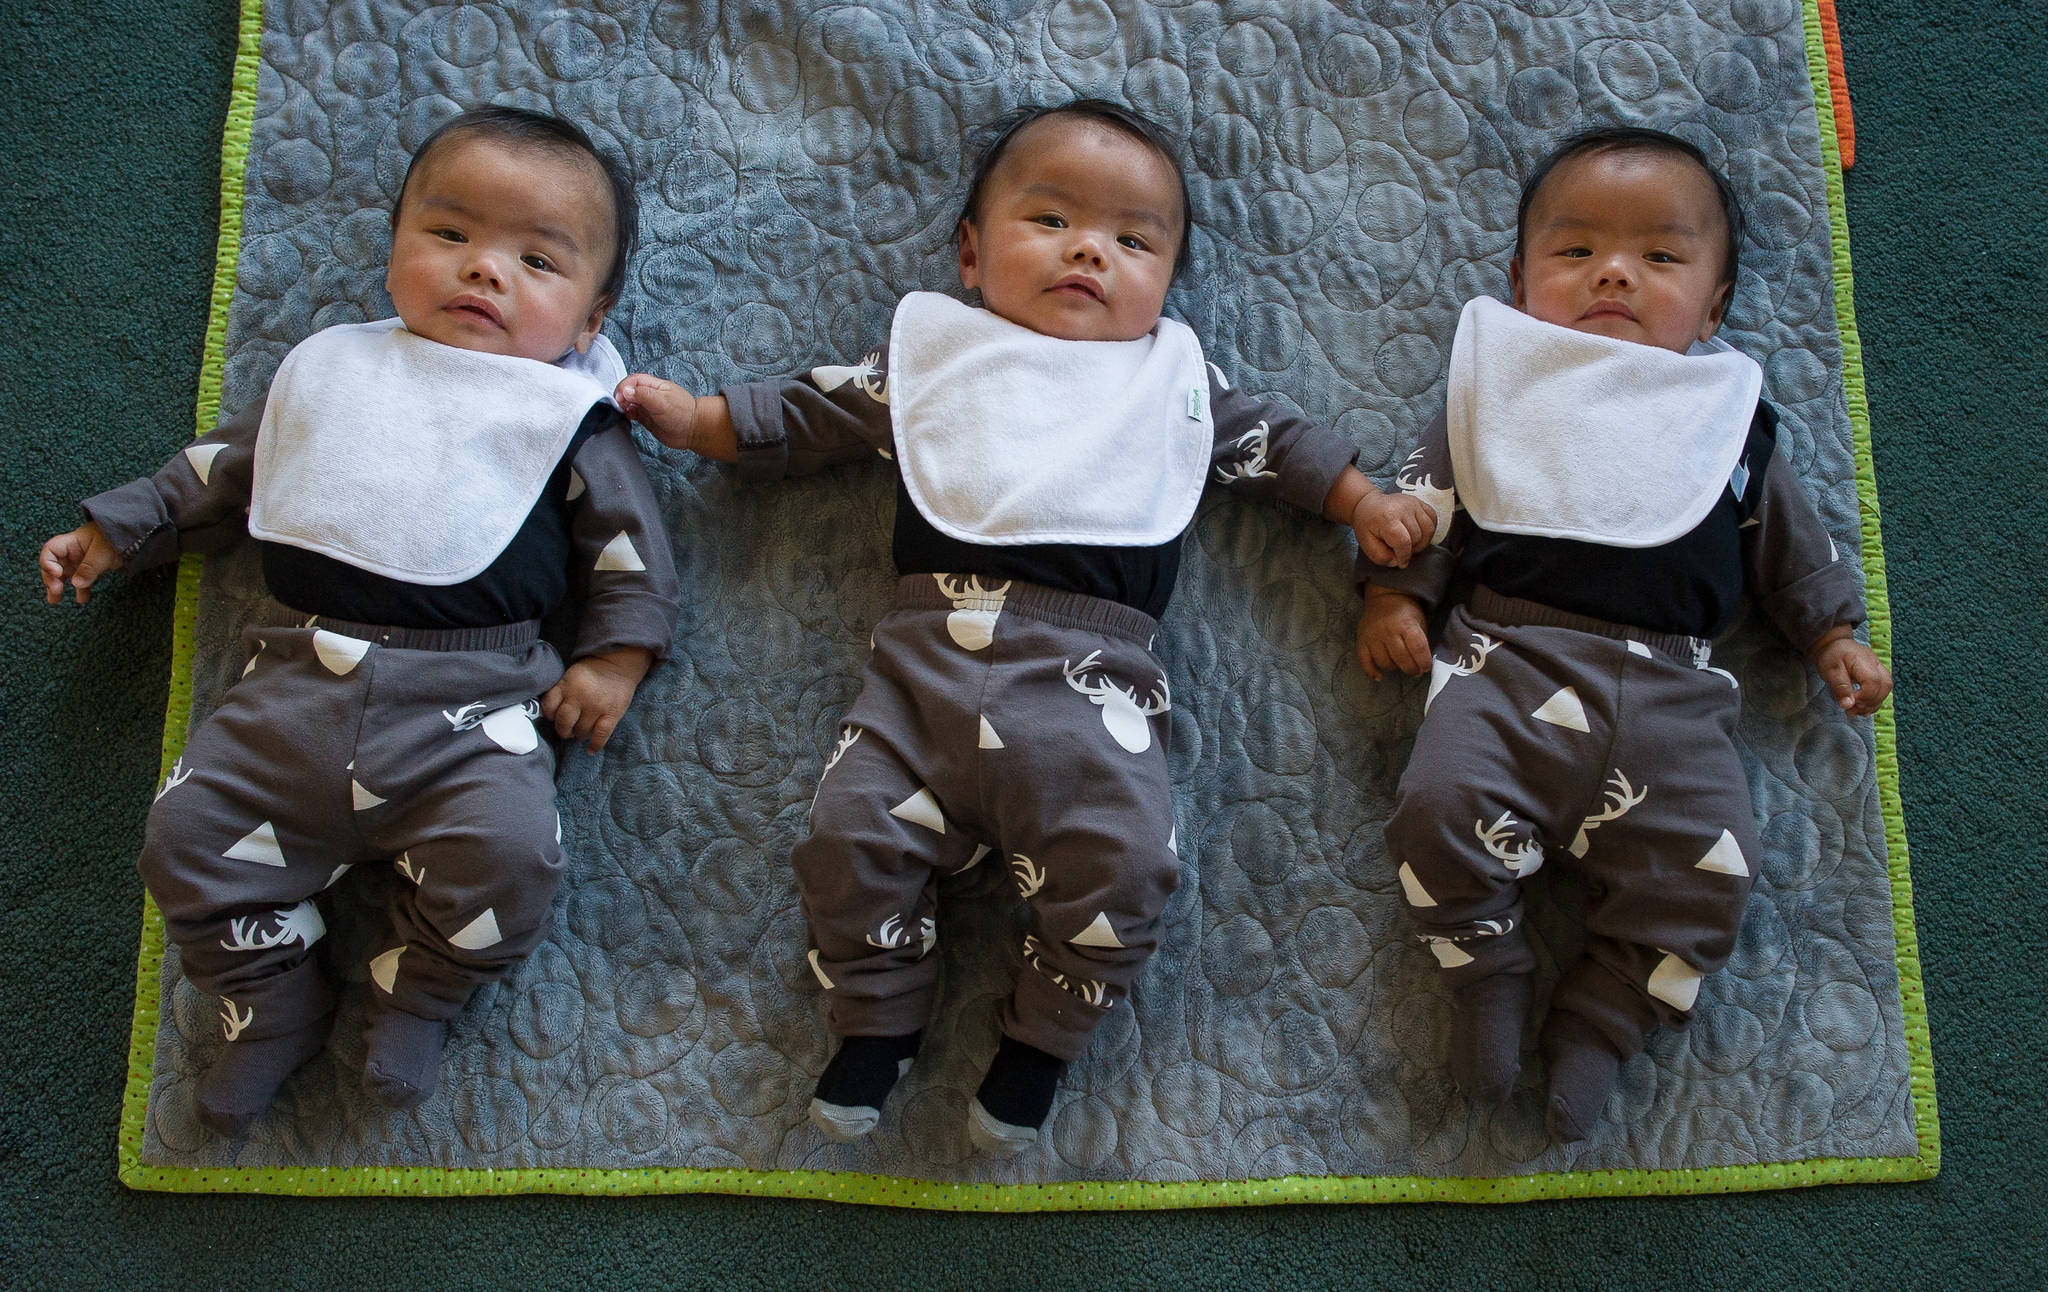 Who’s Who Identical Triplets Prove Difficult To Tell Apart Juneau Empire